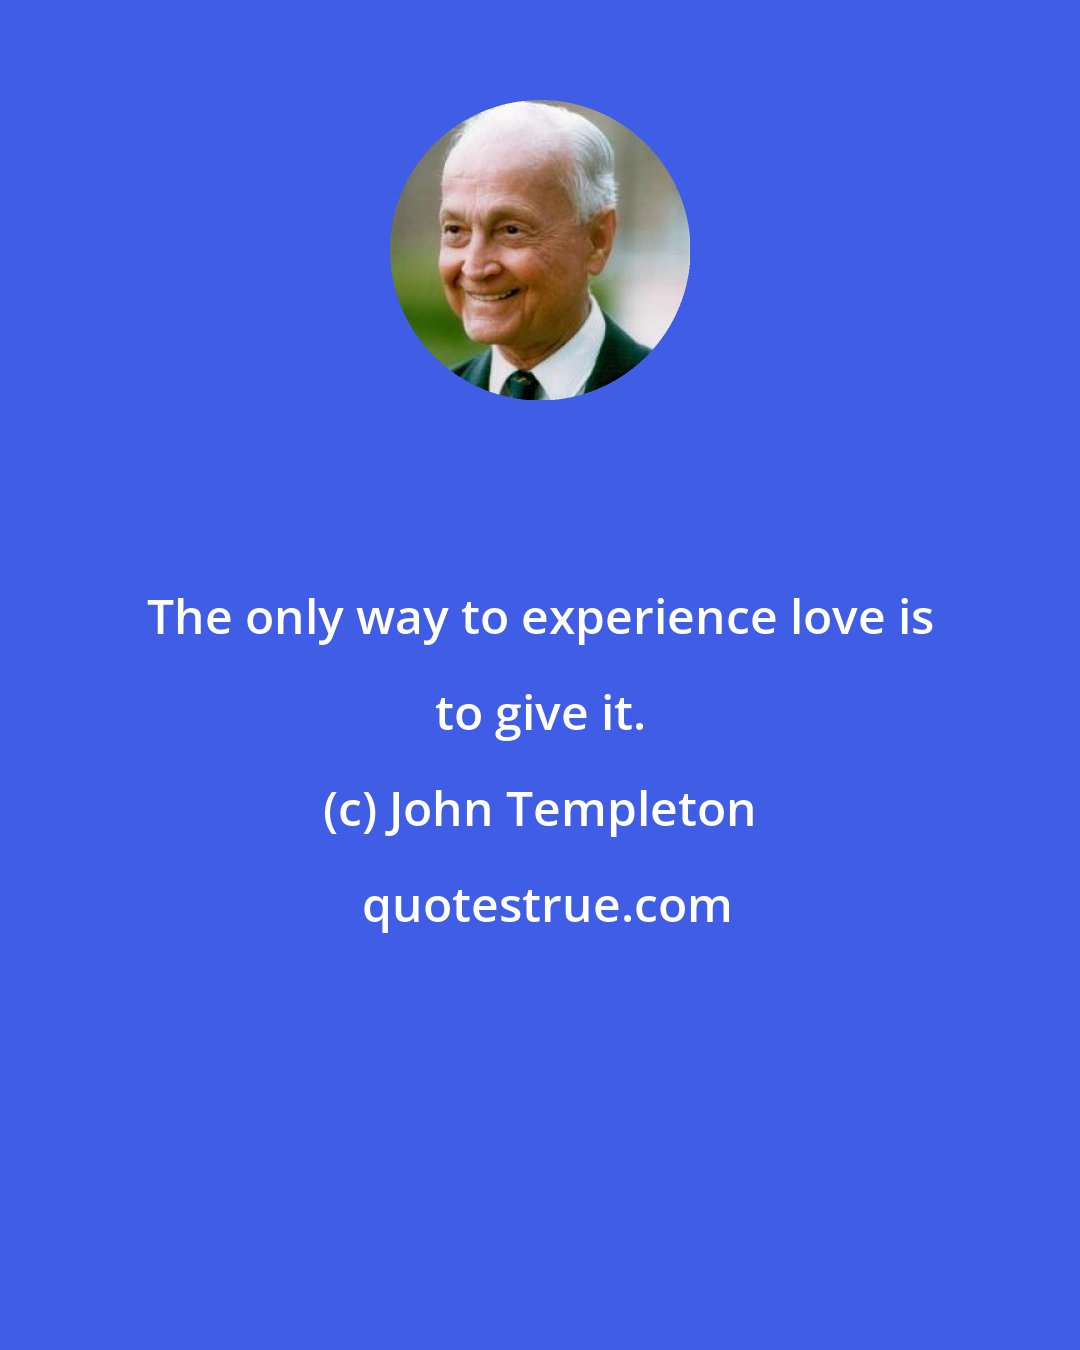 John Templeton: The only way to experience love is to give it.